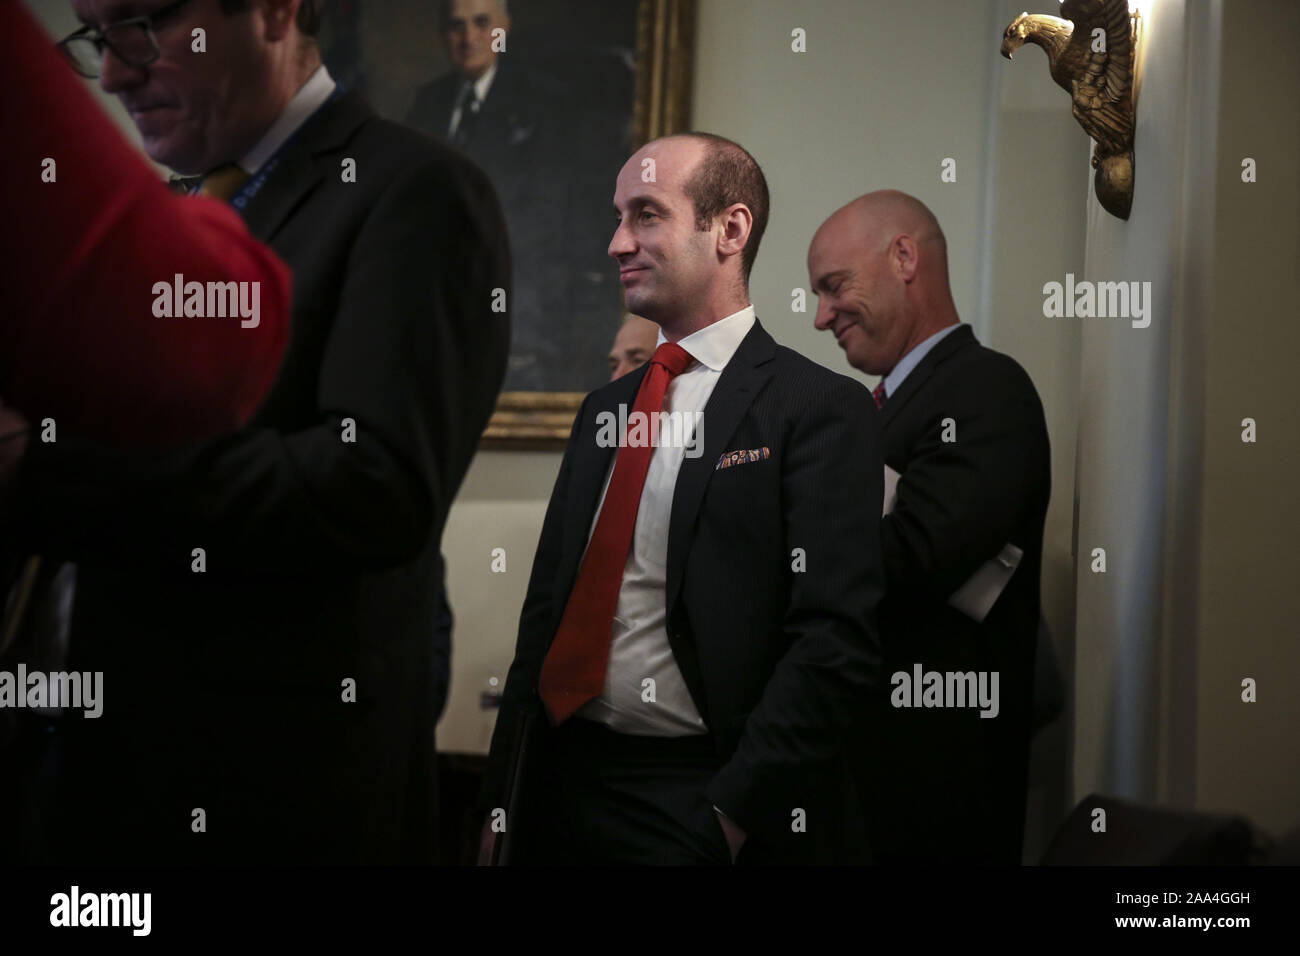 Washington, United States. 19th Nov, 2019. Senior Advisor to the President Stephen Miller attends a Cabinet Meeting with President Donald Trump in the Cabinet Room of the White House on November 19, 2019 in Washington, DC. Photo by Oliver Contreras/UPI Credit: UPI/Alamy Live News Stock Photo